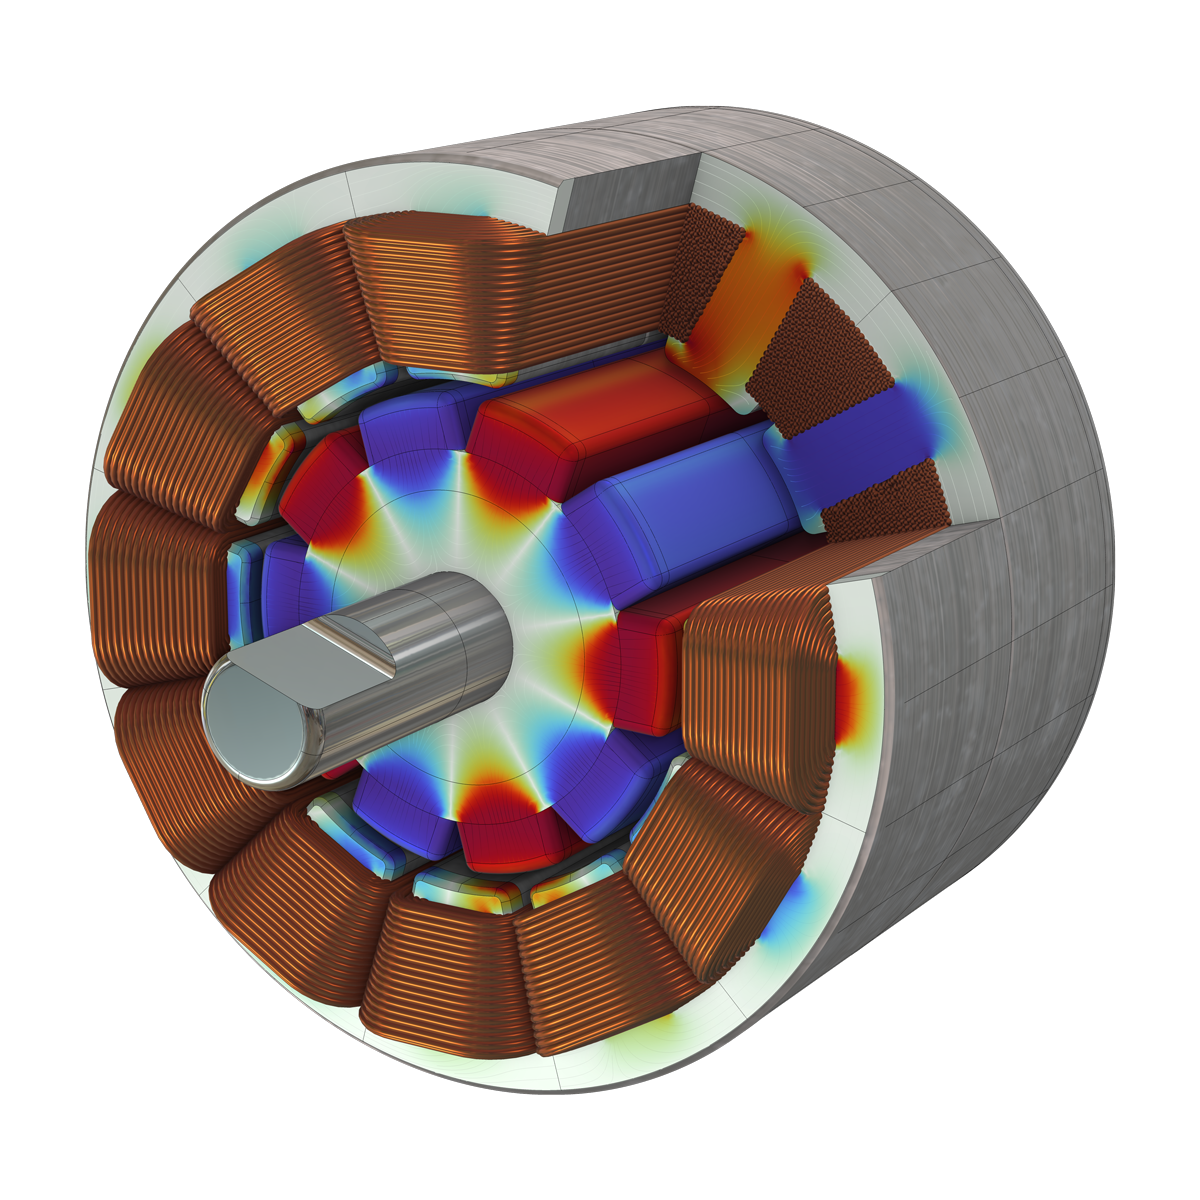 A 3D permanent magnet motor model visualized with copper coils and a rainbow core.